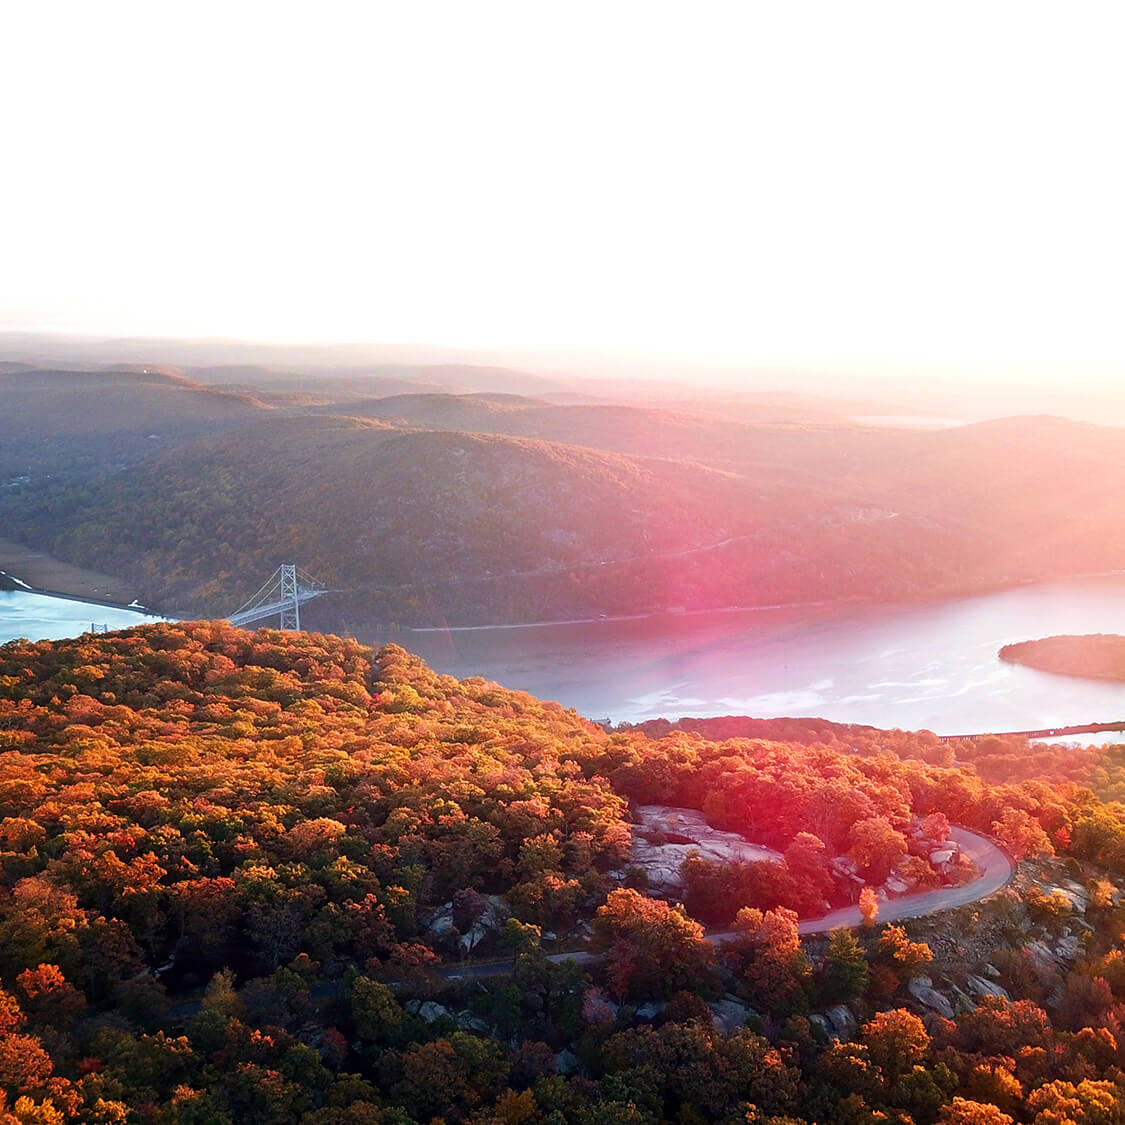 A sunrise view of the Hudson River and valley in autumn